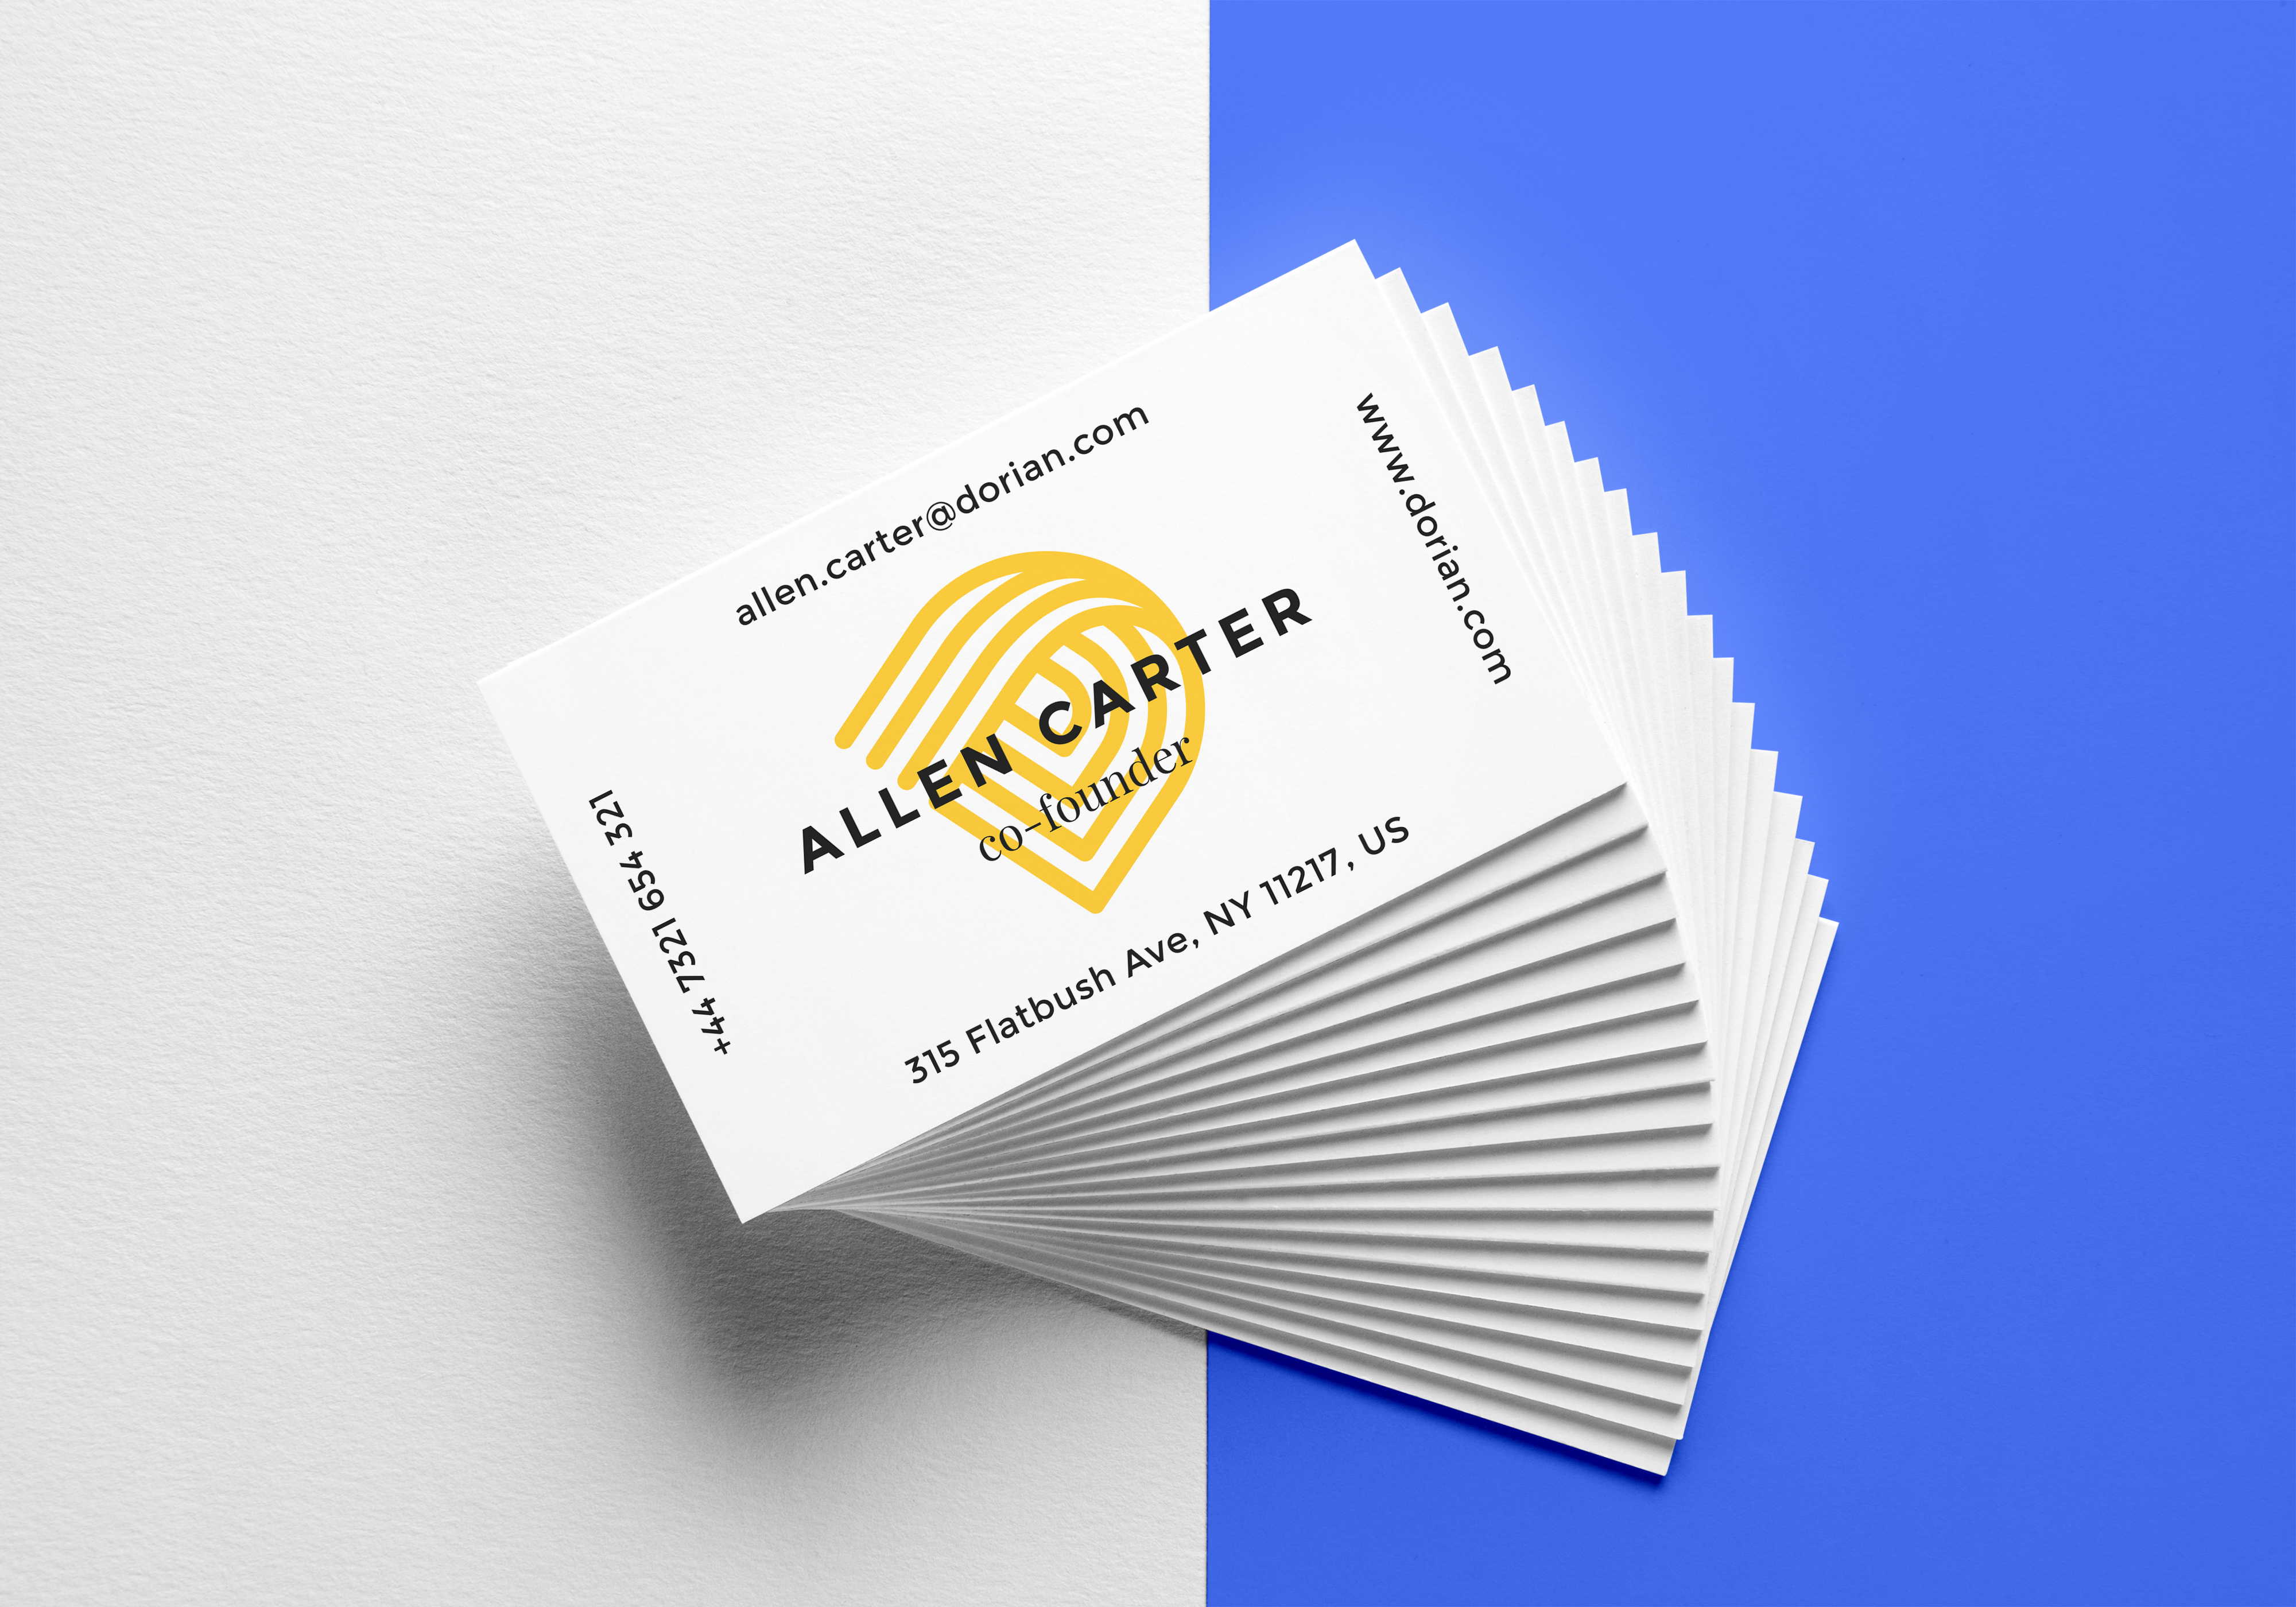 Realistic Business Cards MockUp #6 | GraphicBurger